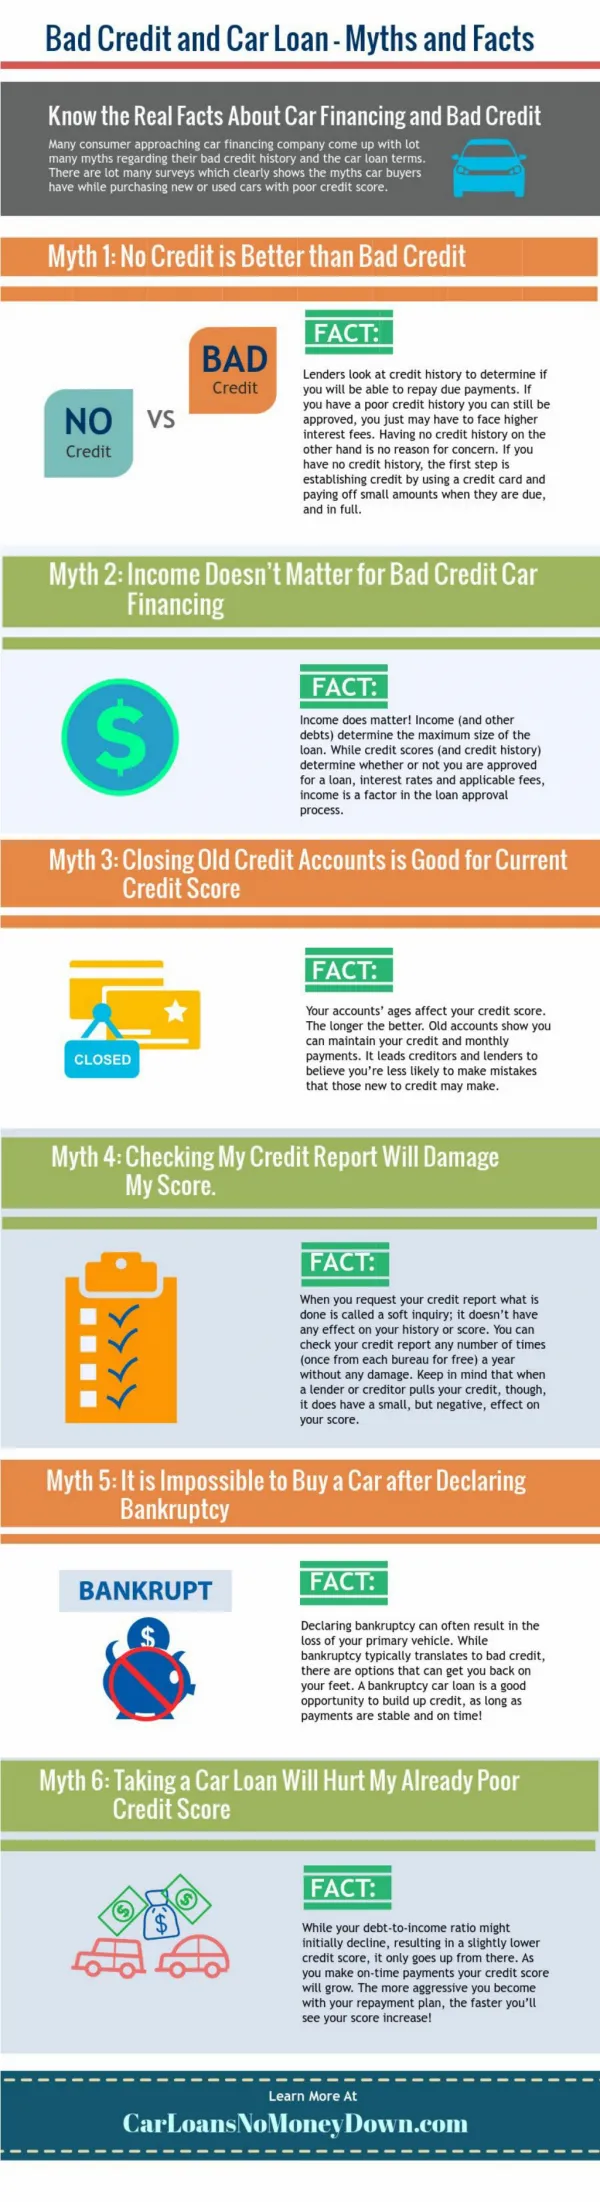 Myths About Bad Credit And Car Loans